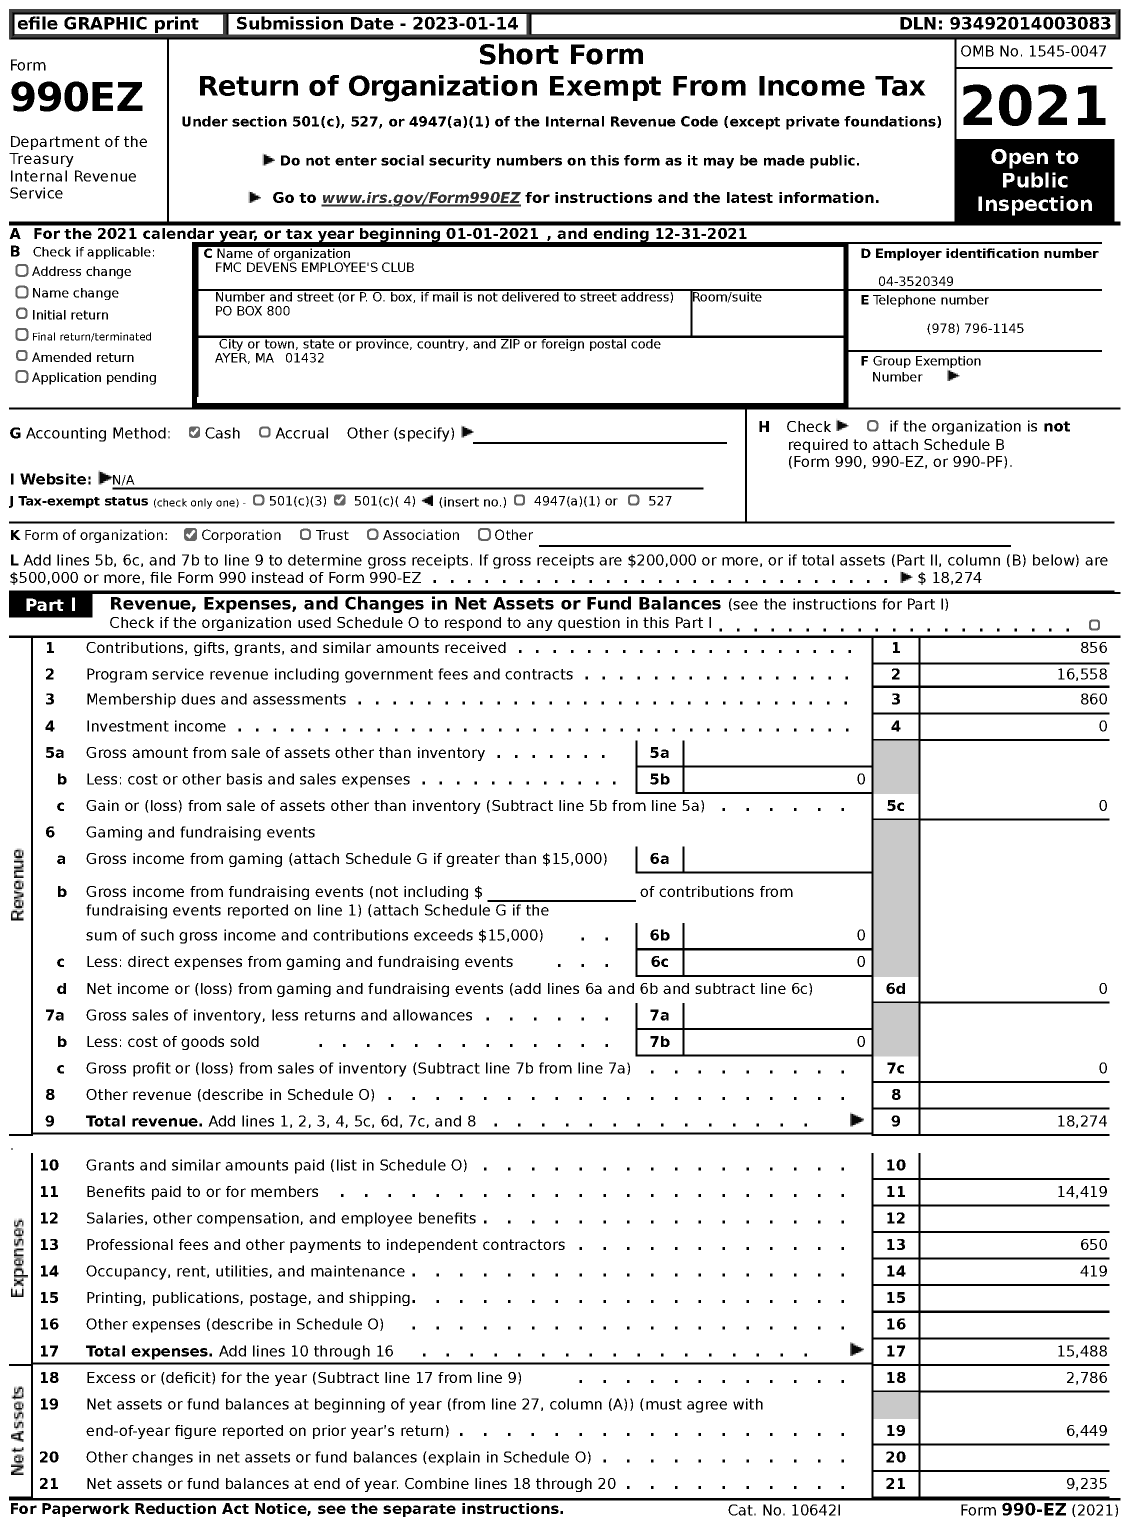 Image of first page of 2021 Form 990EZ for FMC Devens Employee's Club